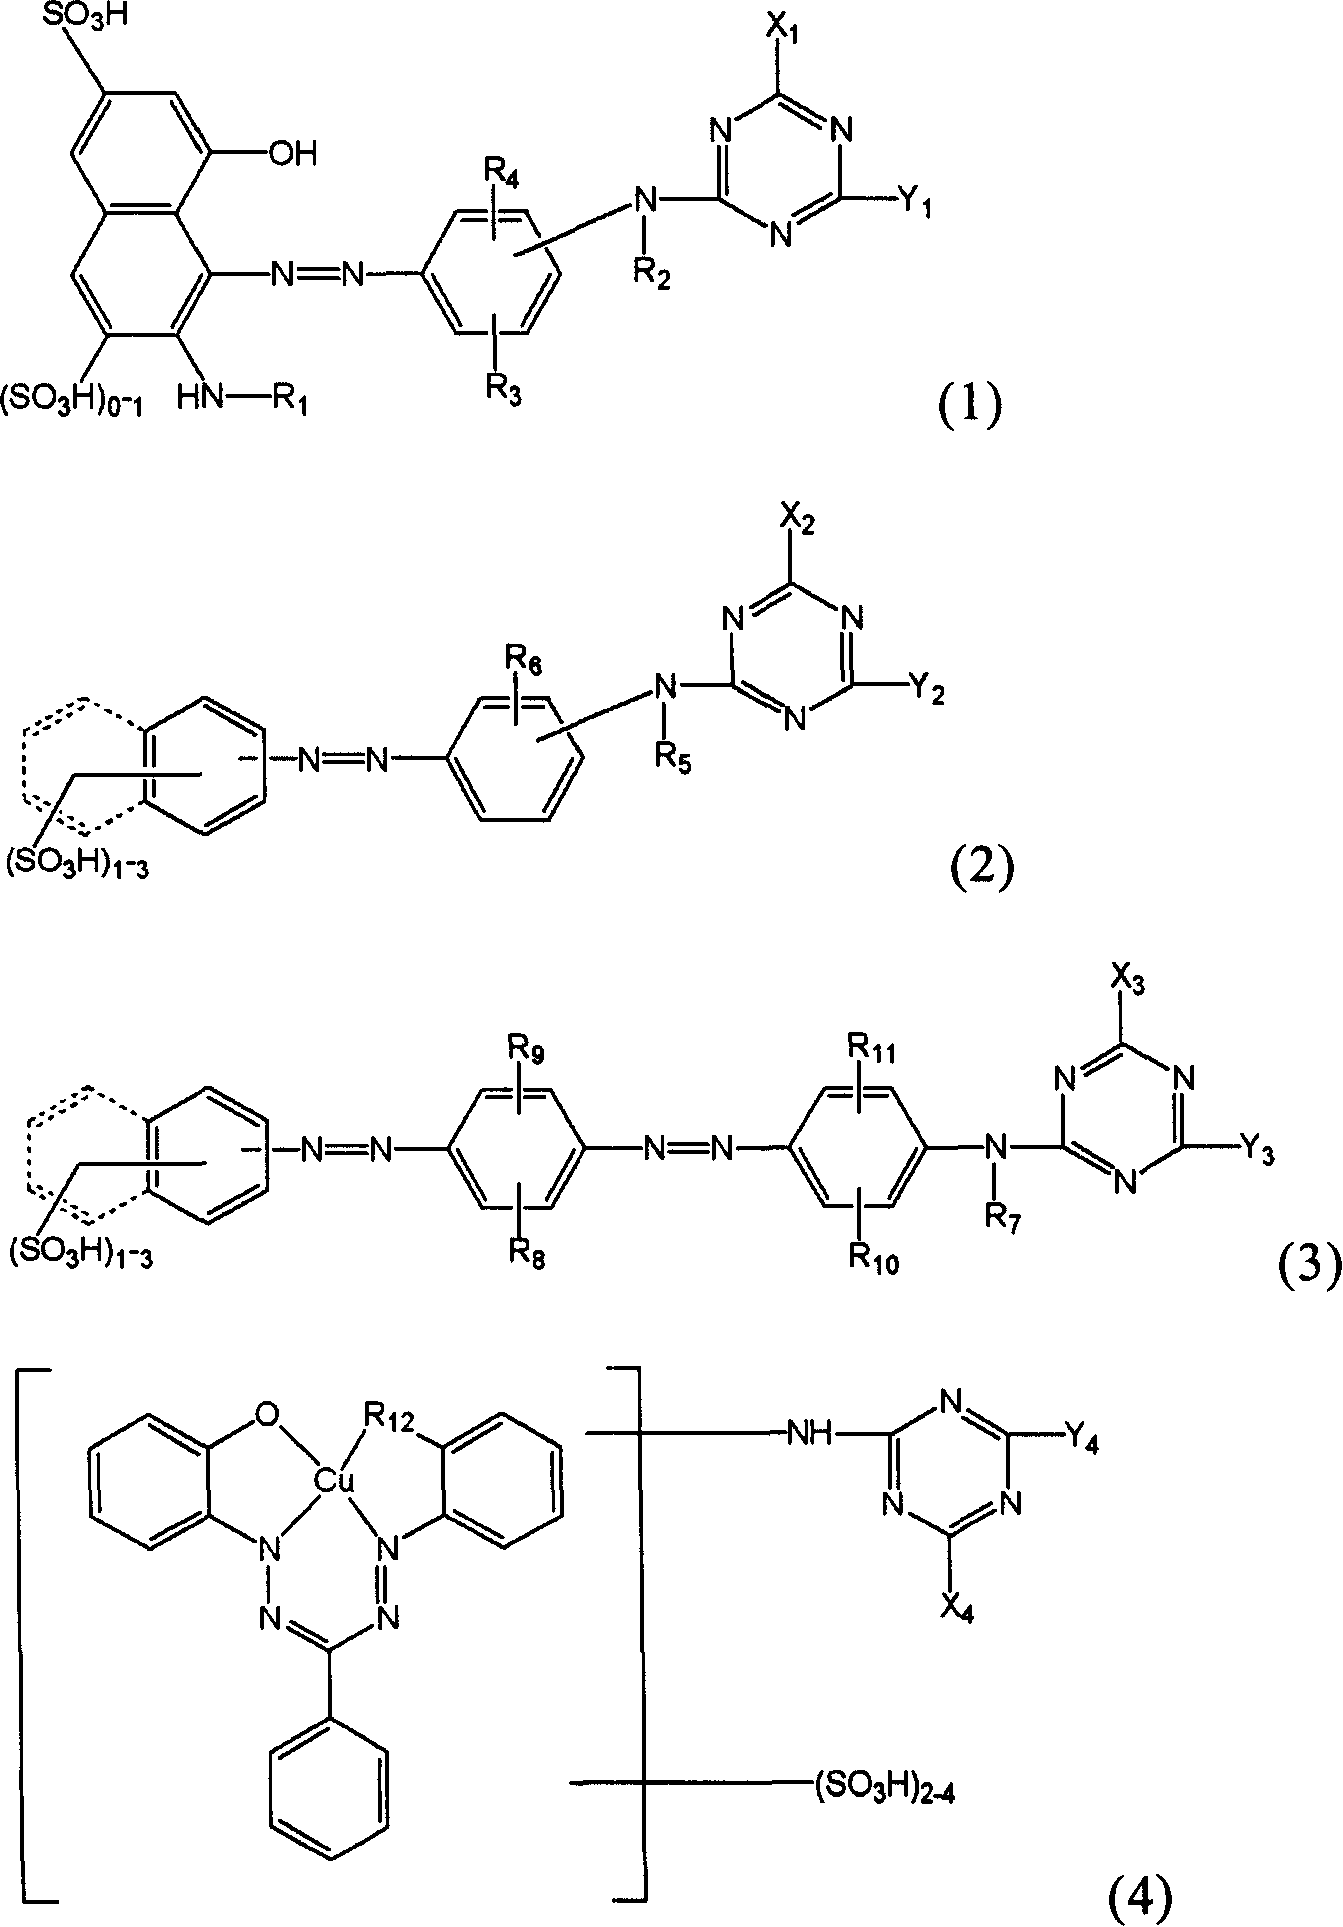 Novel reactive dye composition with three-color combination